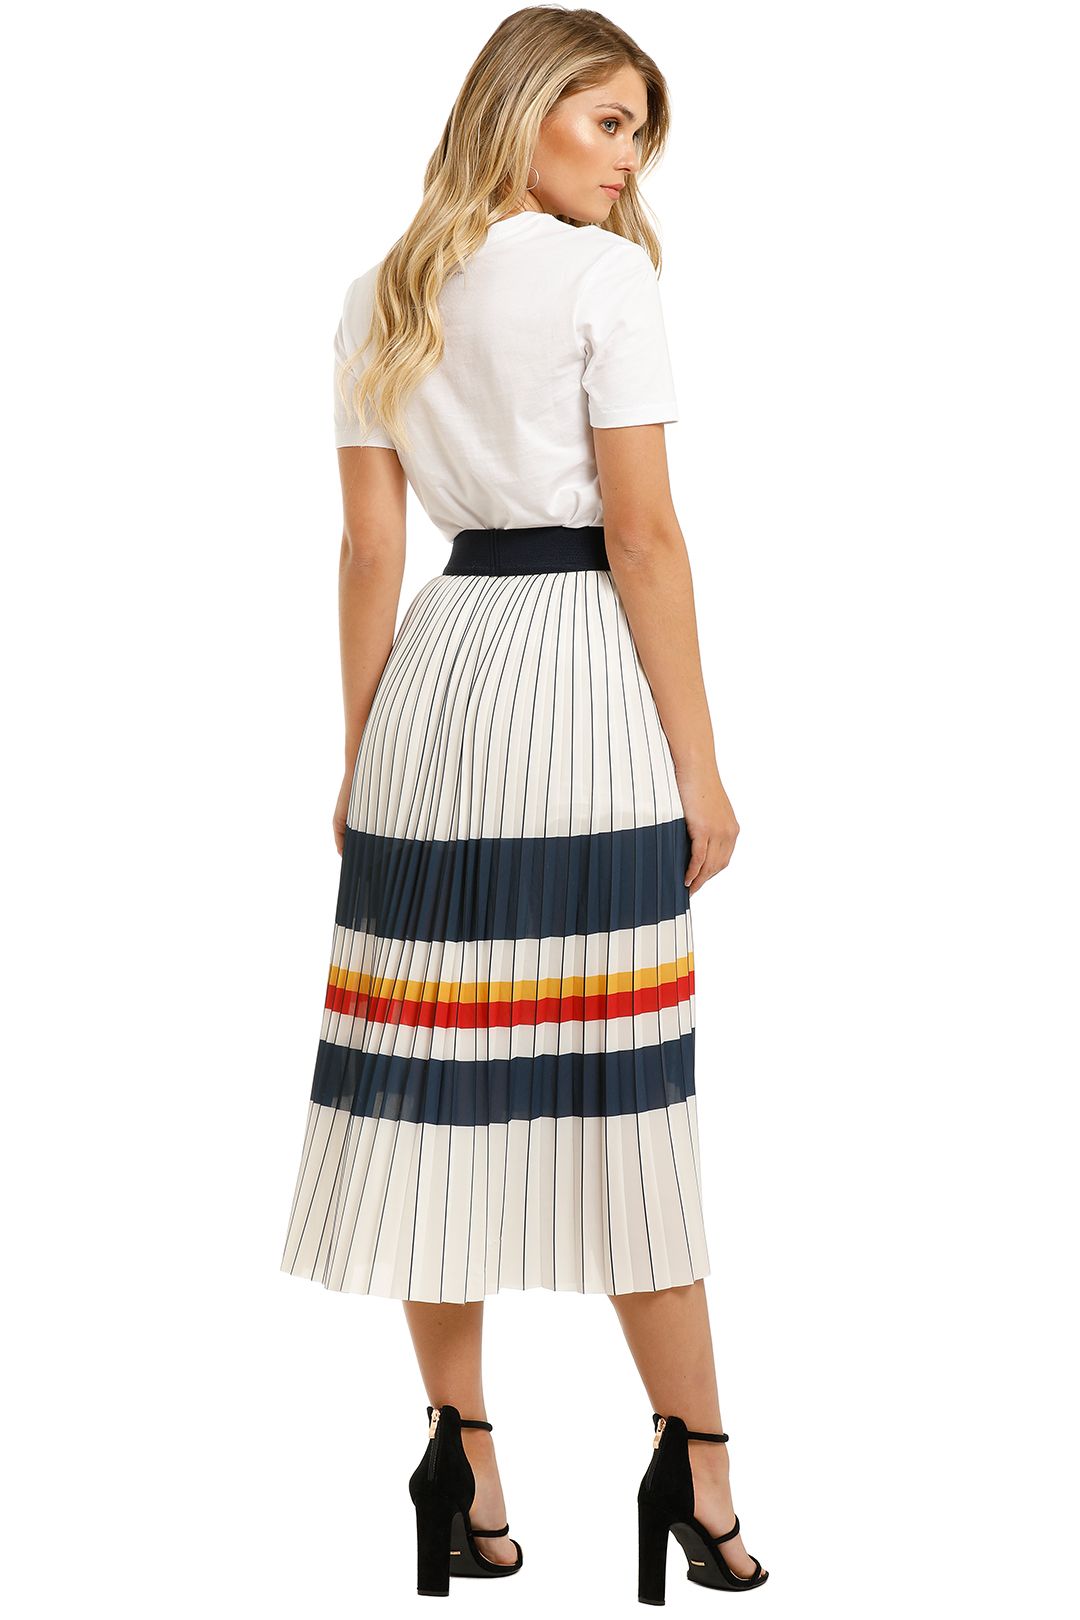 Cooper-By-Trelise-Cooper-Pleat-Of-My-Heart-Front